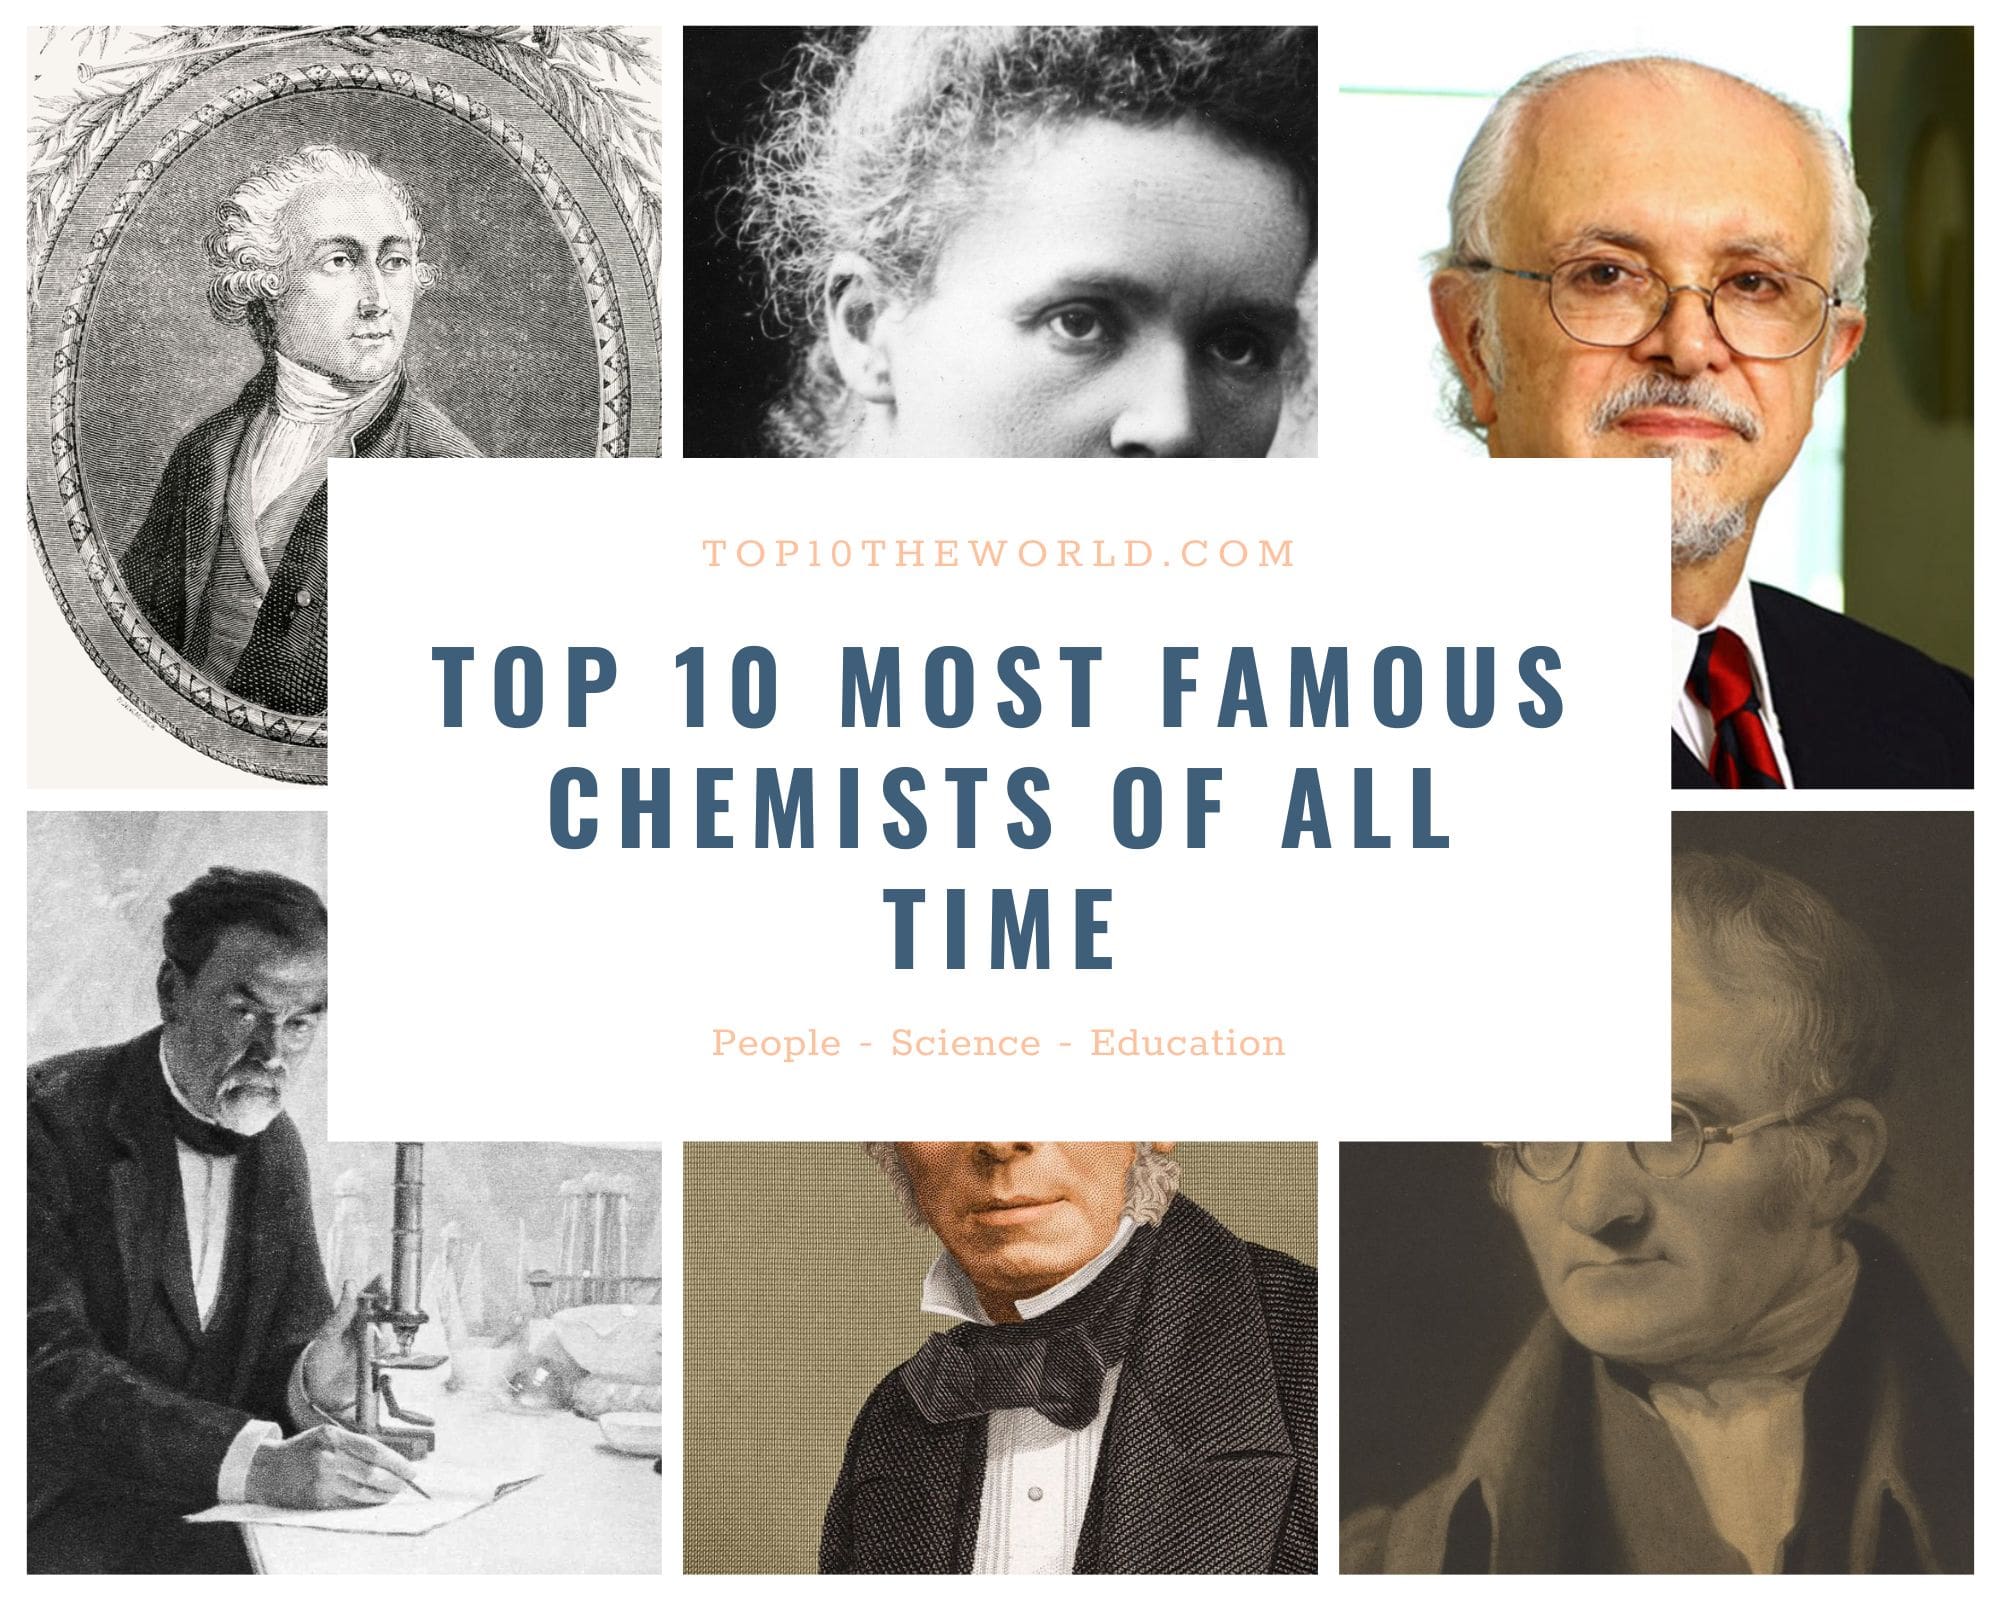 Top 10 Most Famous Chemists of all time